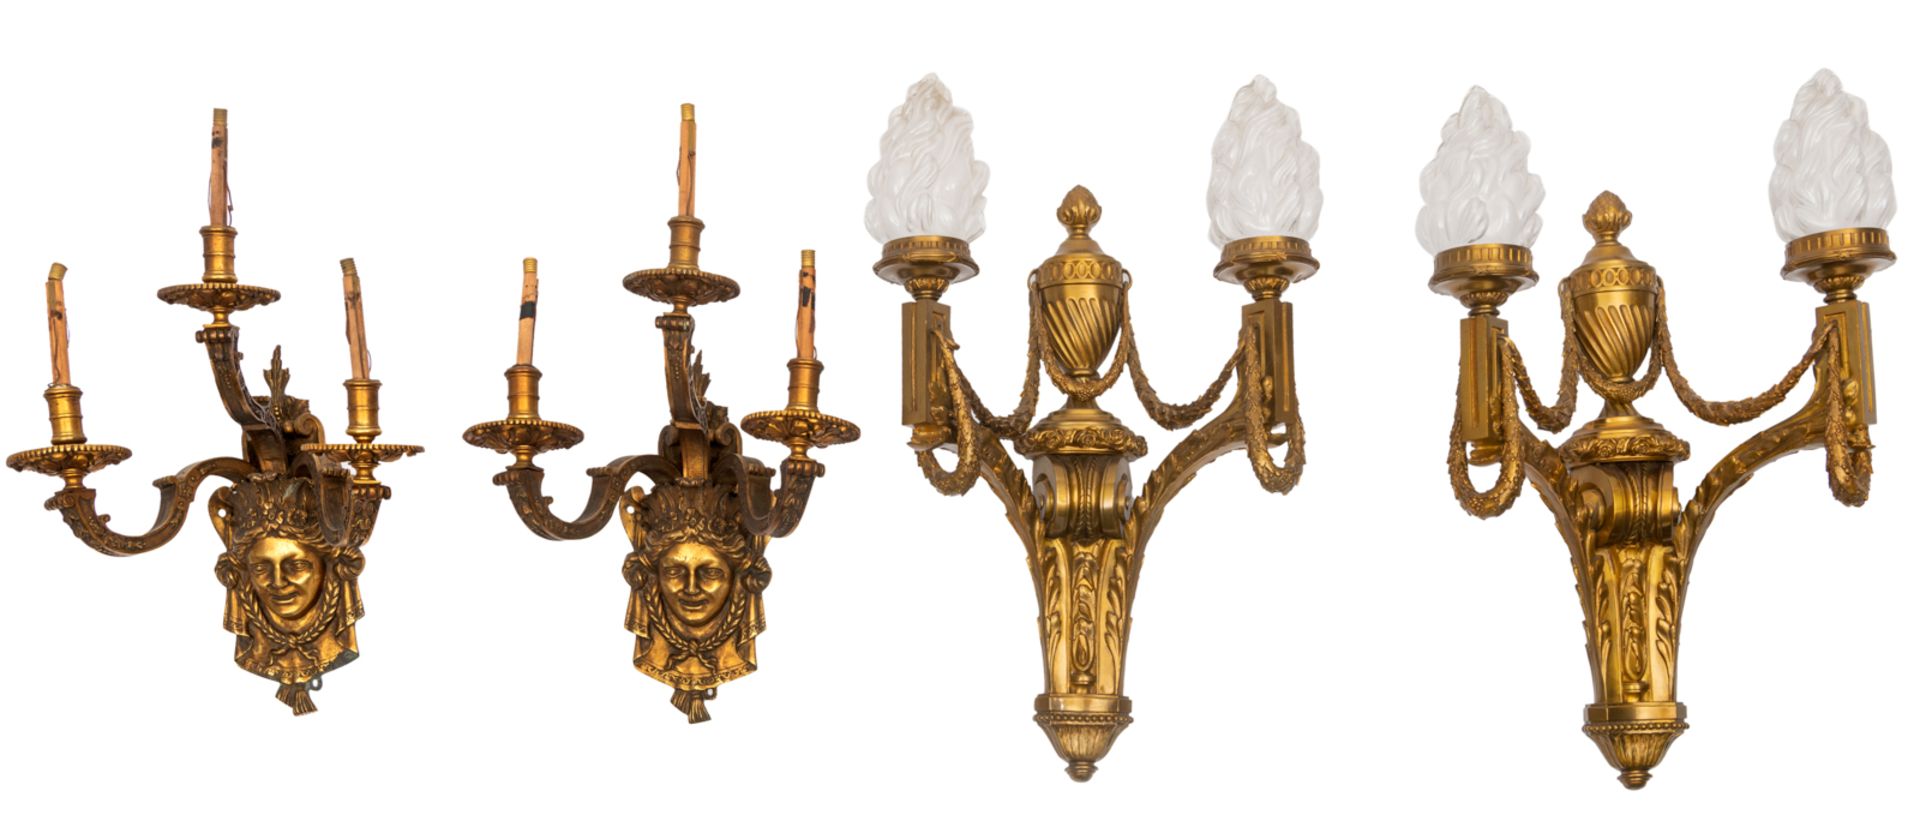 A pair of gilt bronze Baroque Revival wall lamps, H 47 - W 41 cm; added a matching pair of Neoclassi